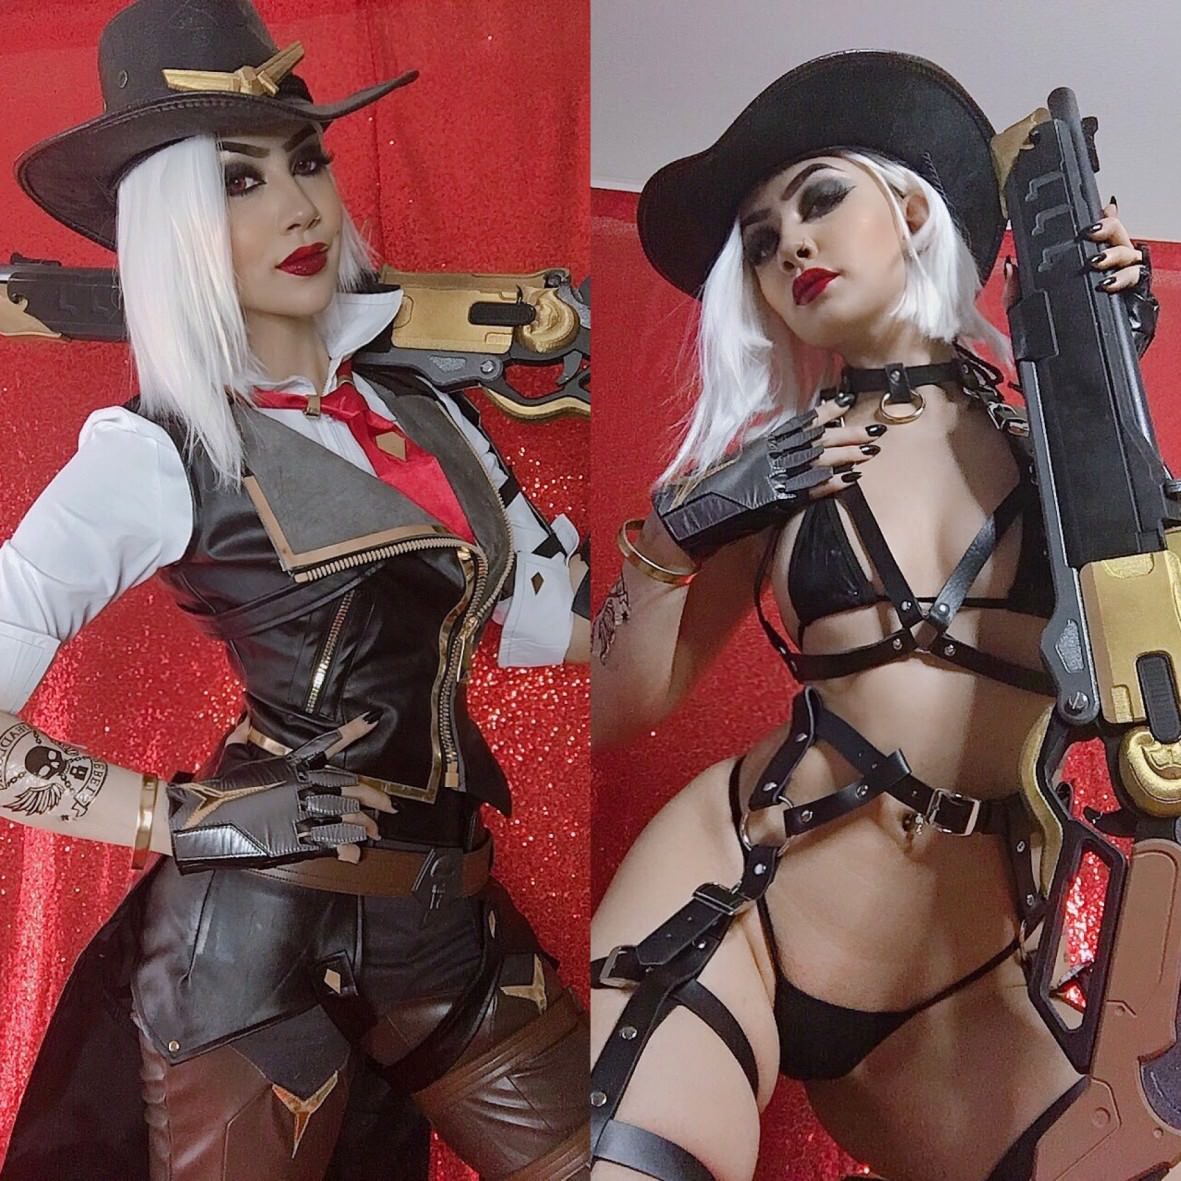  Ashe from Overwatch by Felicia Vox